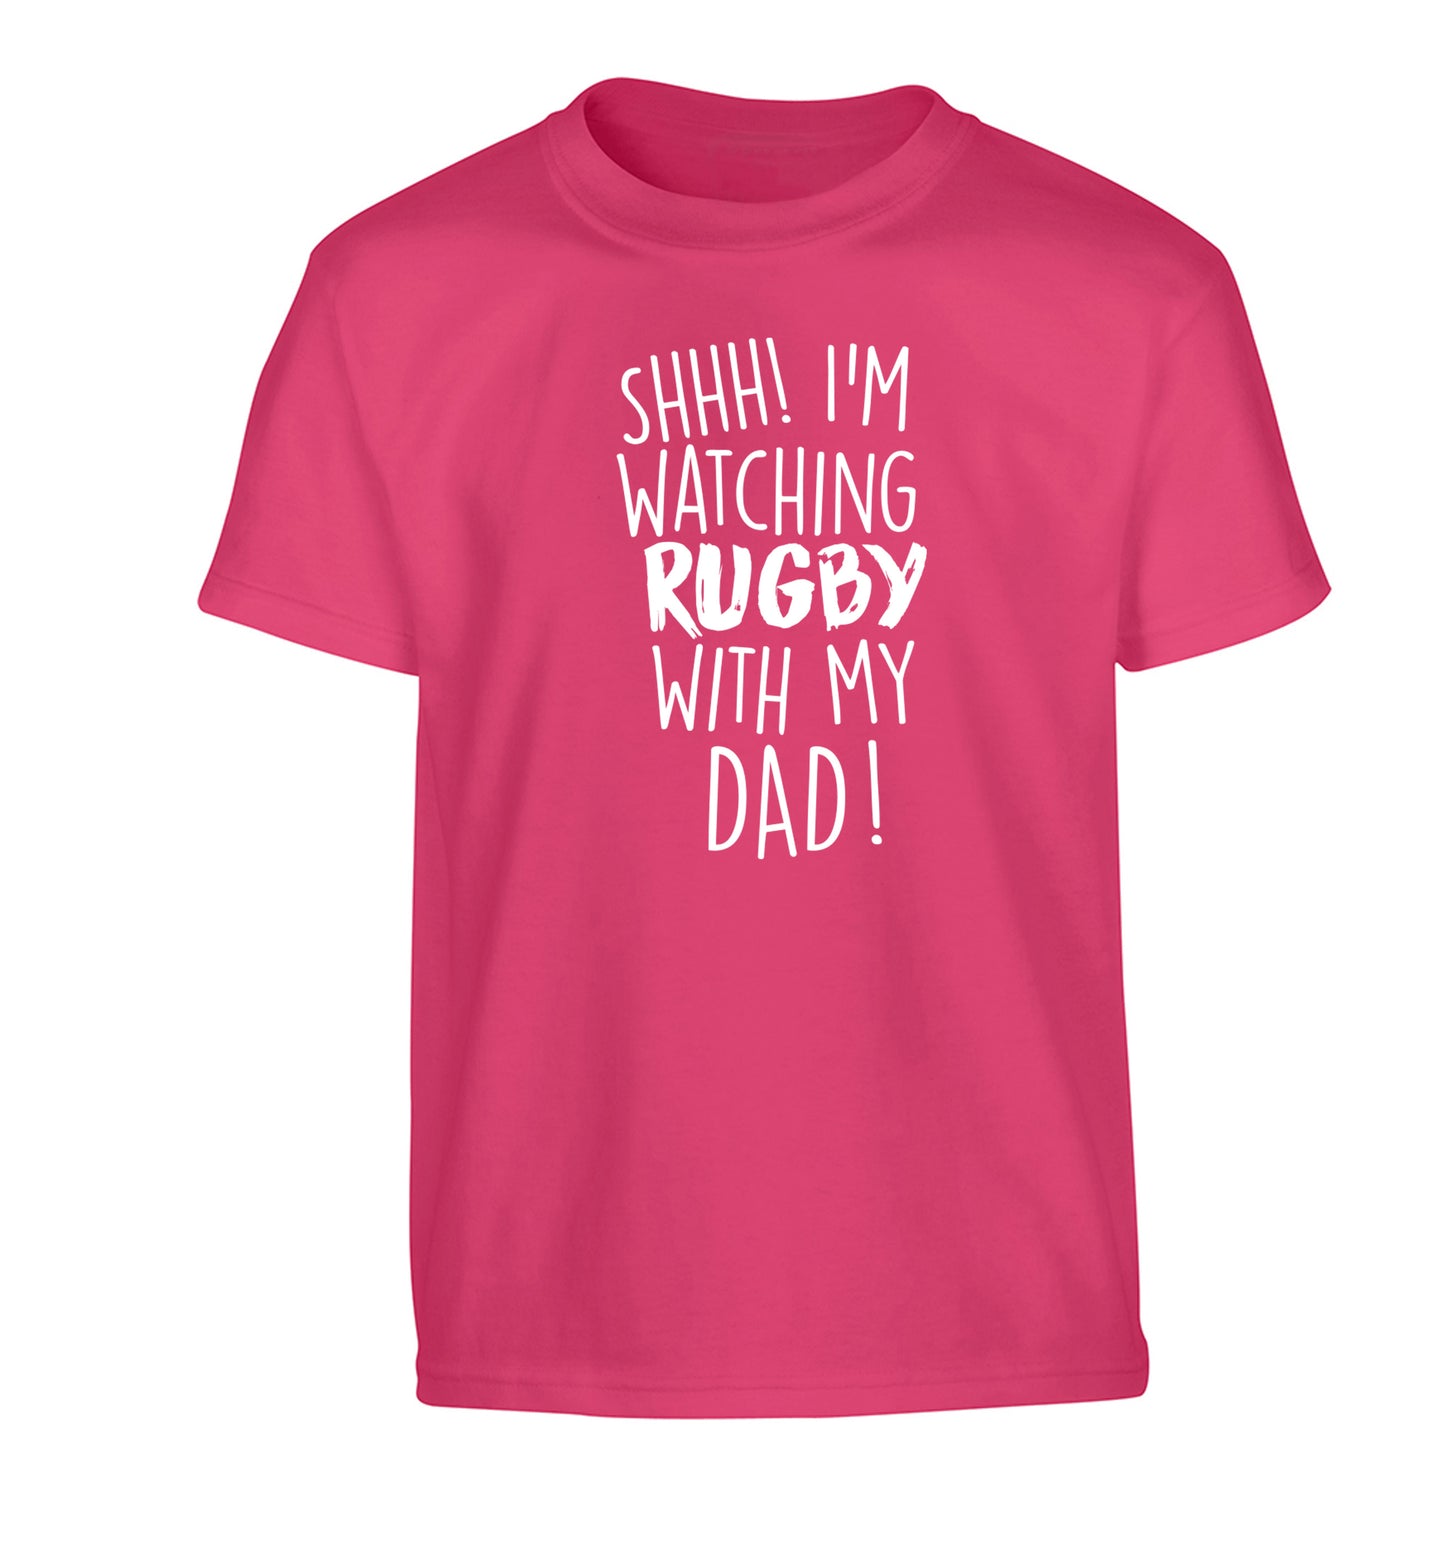 Shh... I'm watching rugby with my dad Children's pink Tshirt 12-13 Years